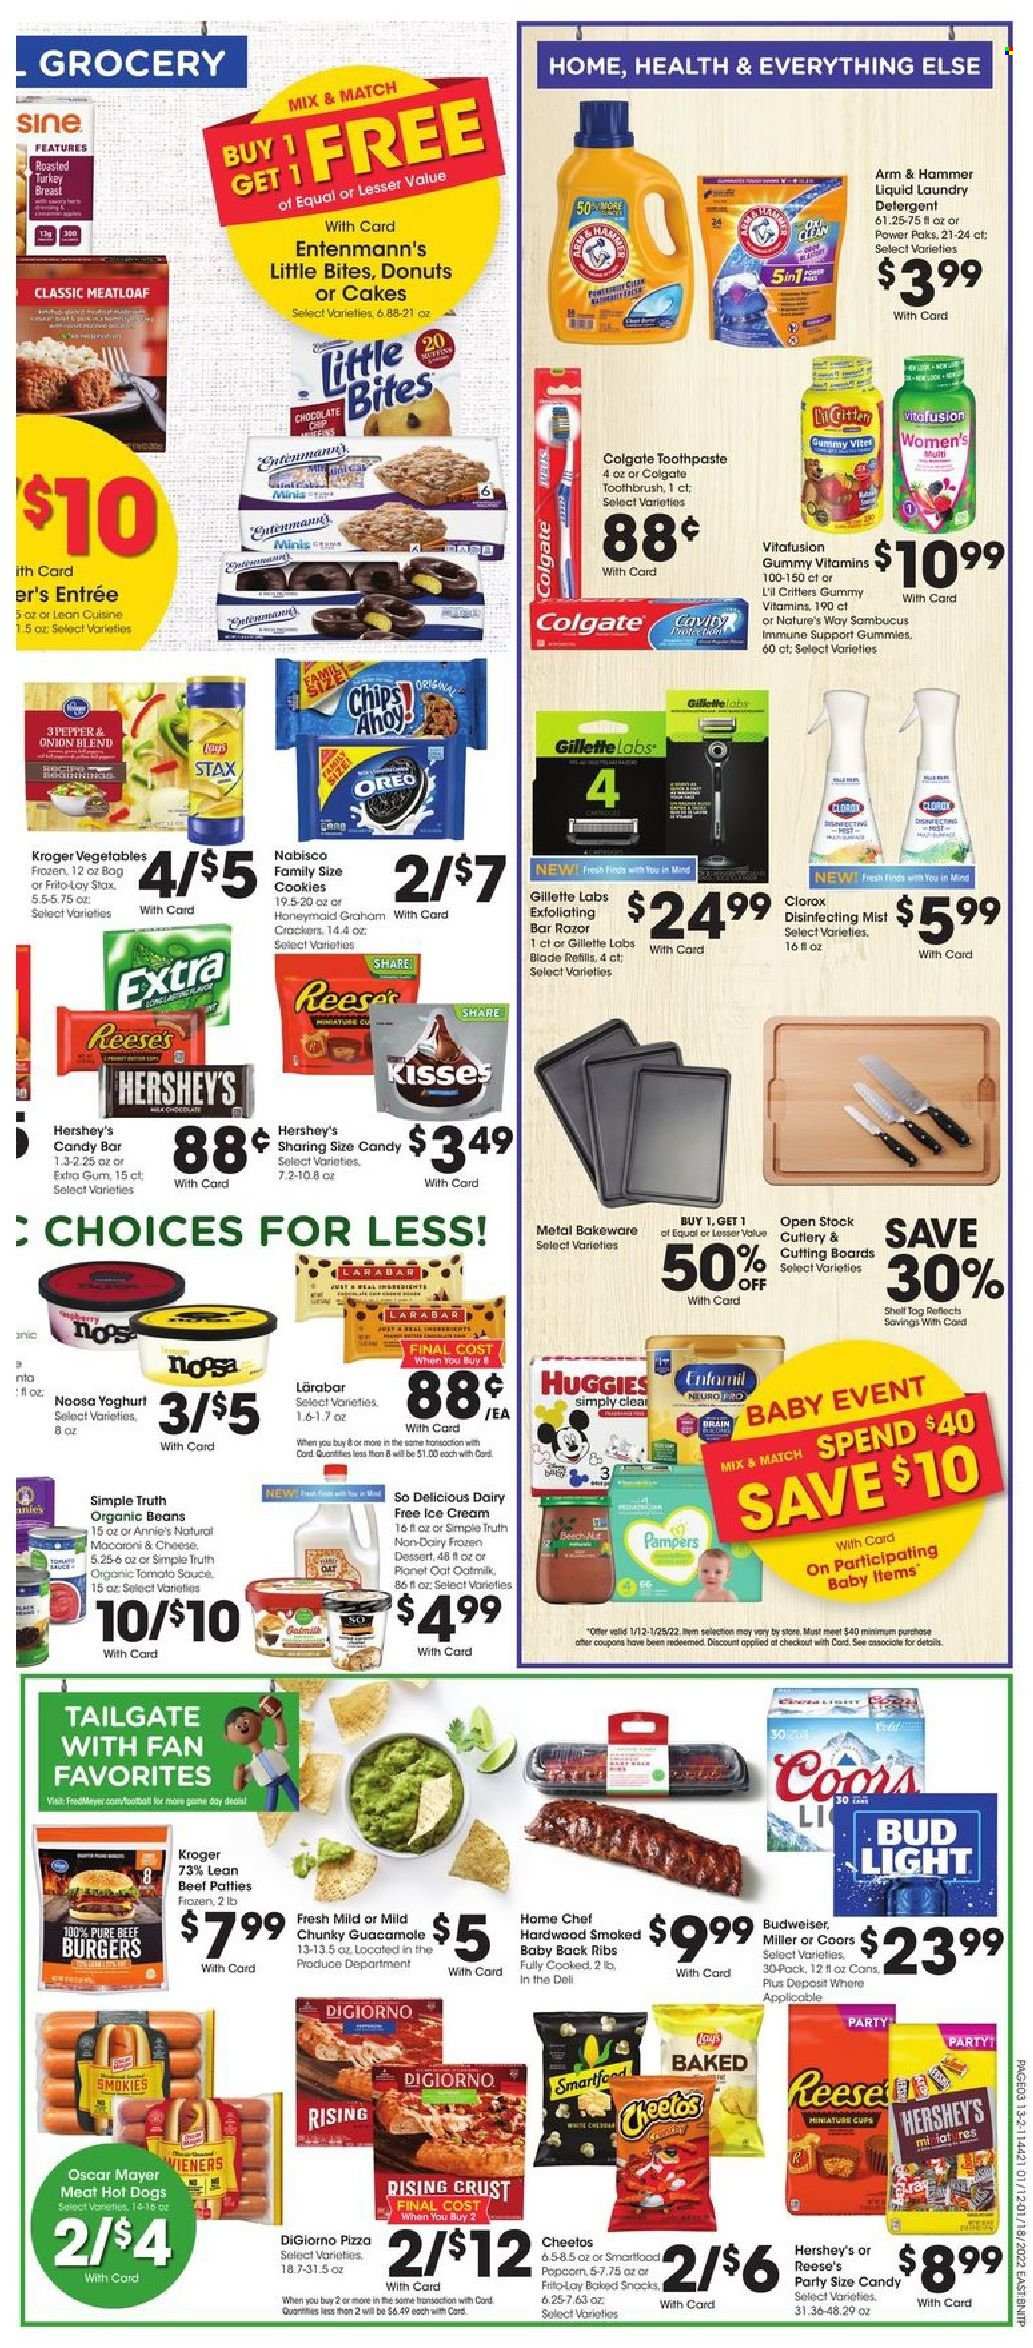 thumbnail - Fred Meyer Flyer - 01/12/2022 - 01/18/2022 - Sales products - cake, donut, Entenmann's, beans, hot dog, hamburger, meatloaf, Lean Cuisine, Annie's, Oscar Mayer, guacamole, Oreo, yoghurt, oat milk, ice cream, Reese's, Hershey's, cookies, crackers, Little Bites, Cheetos, Smartfood, popcorn, Frito-Lay, ARM & HAMMER, tomato sauce, beer, Bud Light, Miller, Enfamil, turkey breast, beef meat, pork meat, pork ribs, pork back ribs, Huggies, Pampers, detergent, Clorox, laundry detergent, Colgate, toothbrush, toothpaste, Gillette, razor, cup, bakeware, Lara, Vitafusion, Budweiser, Coors. Page 6.